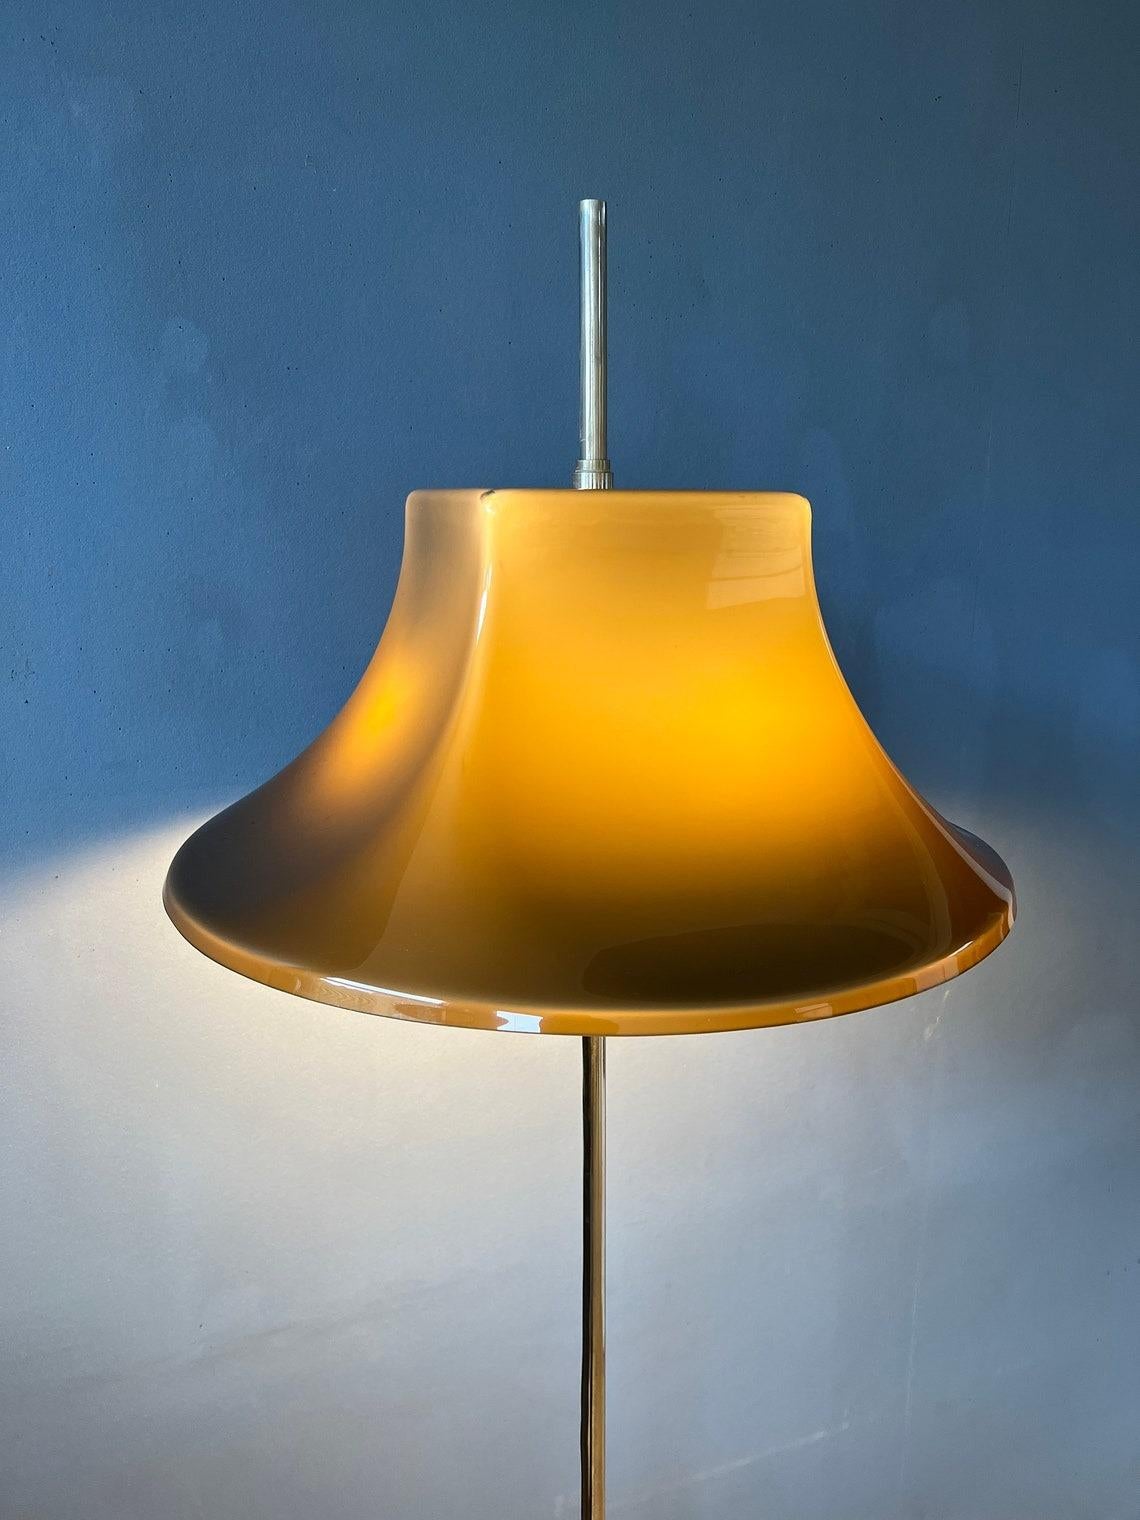 Very rare high quality space age floor lamp by Willem Hagoort with acrylic glass shade. The shade can be moved up and down the (heavy) base. The lamp requires two E27 lightbulbs and currently has an EU-plug (works outside EU with